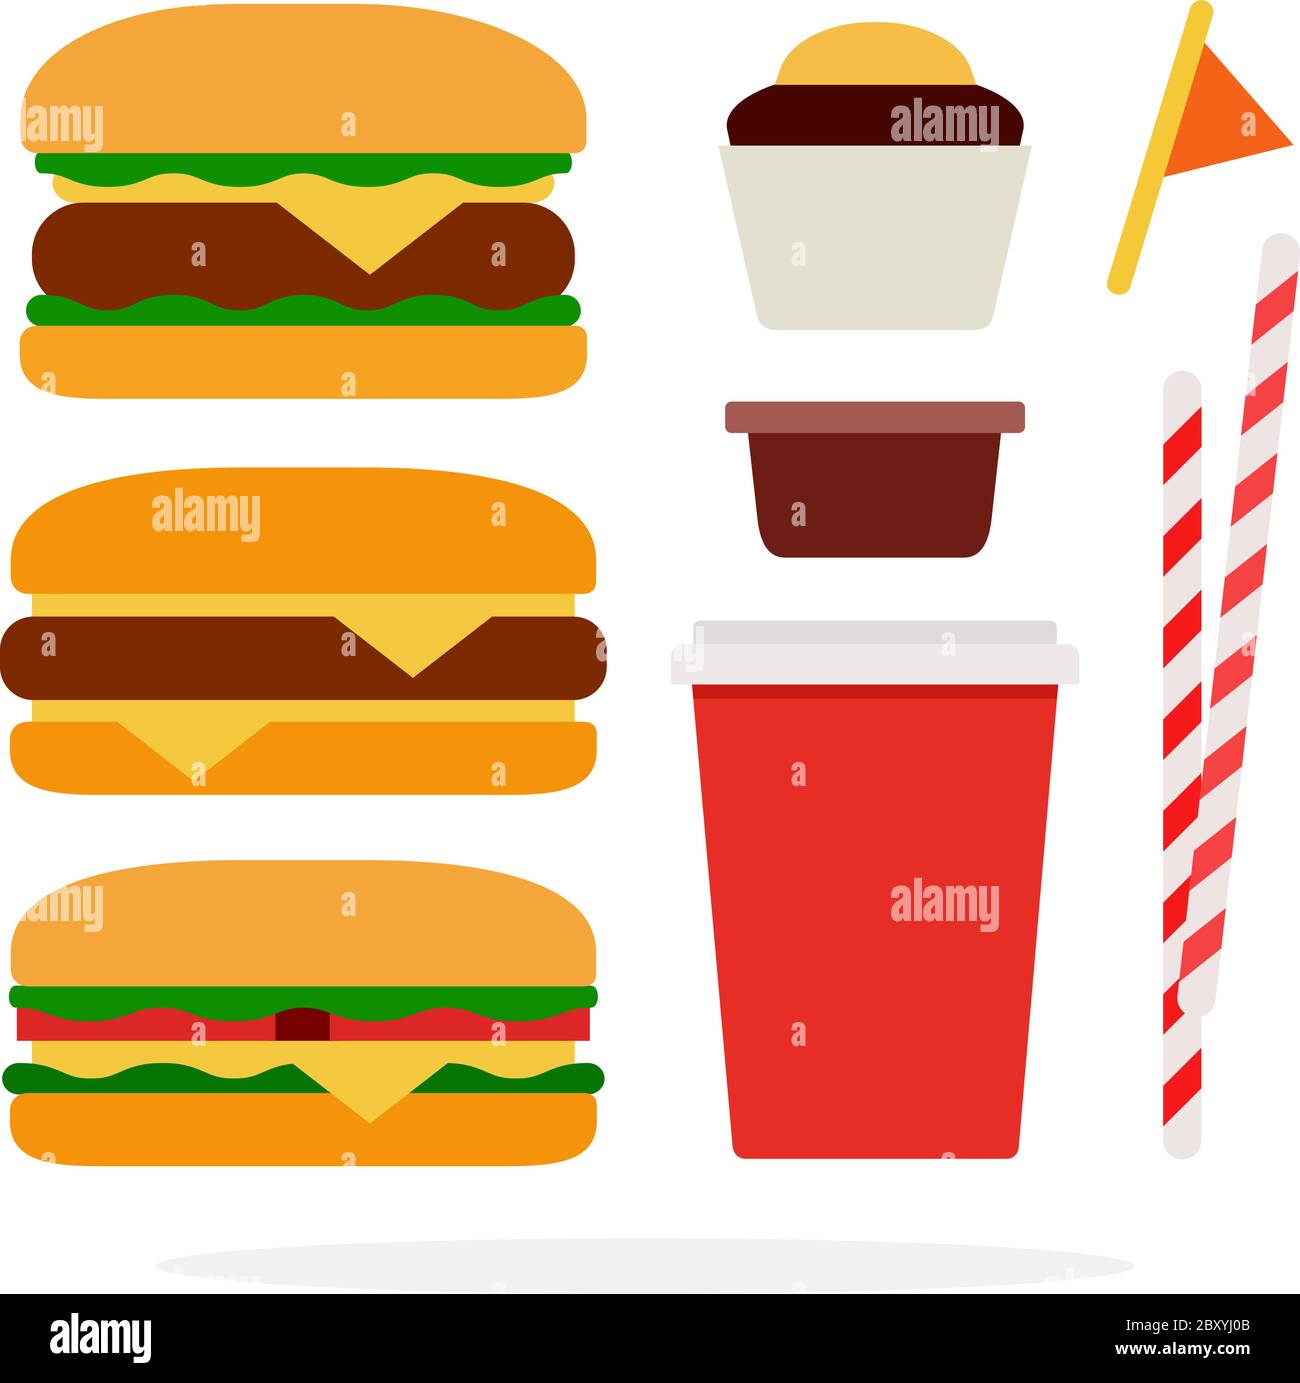 Cheeseburger, burger with beef, veggie burger, plastic cup for drinks, straws, barbecue sauce, chocolate cake Stock Vector